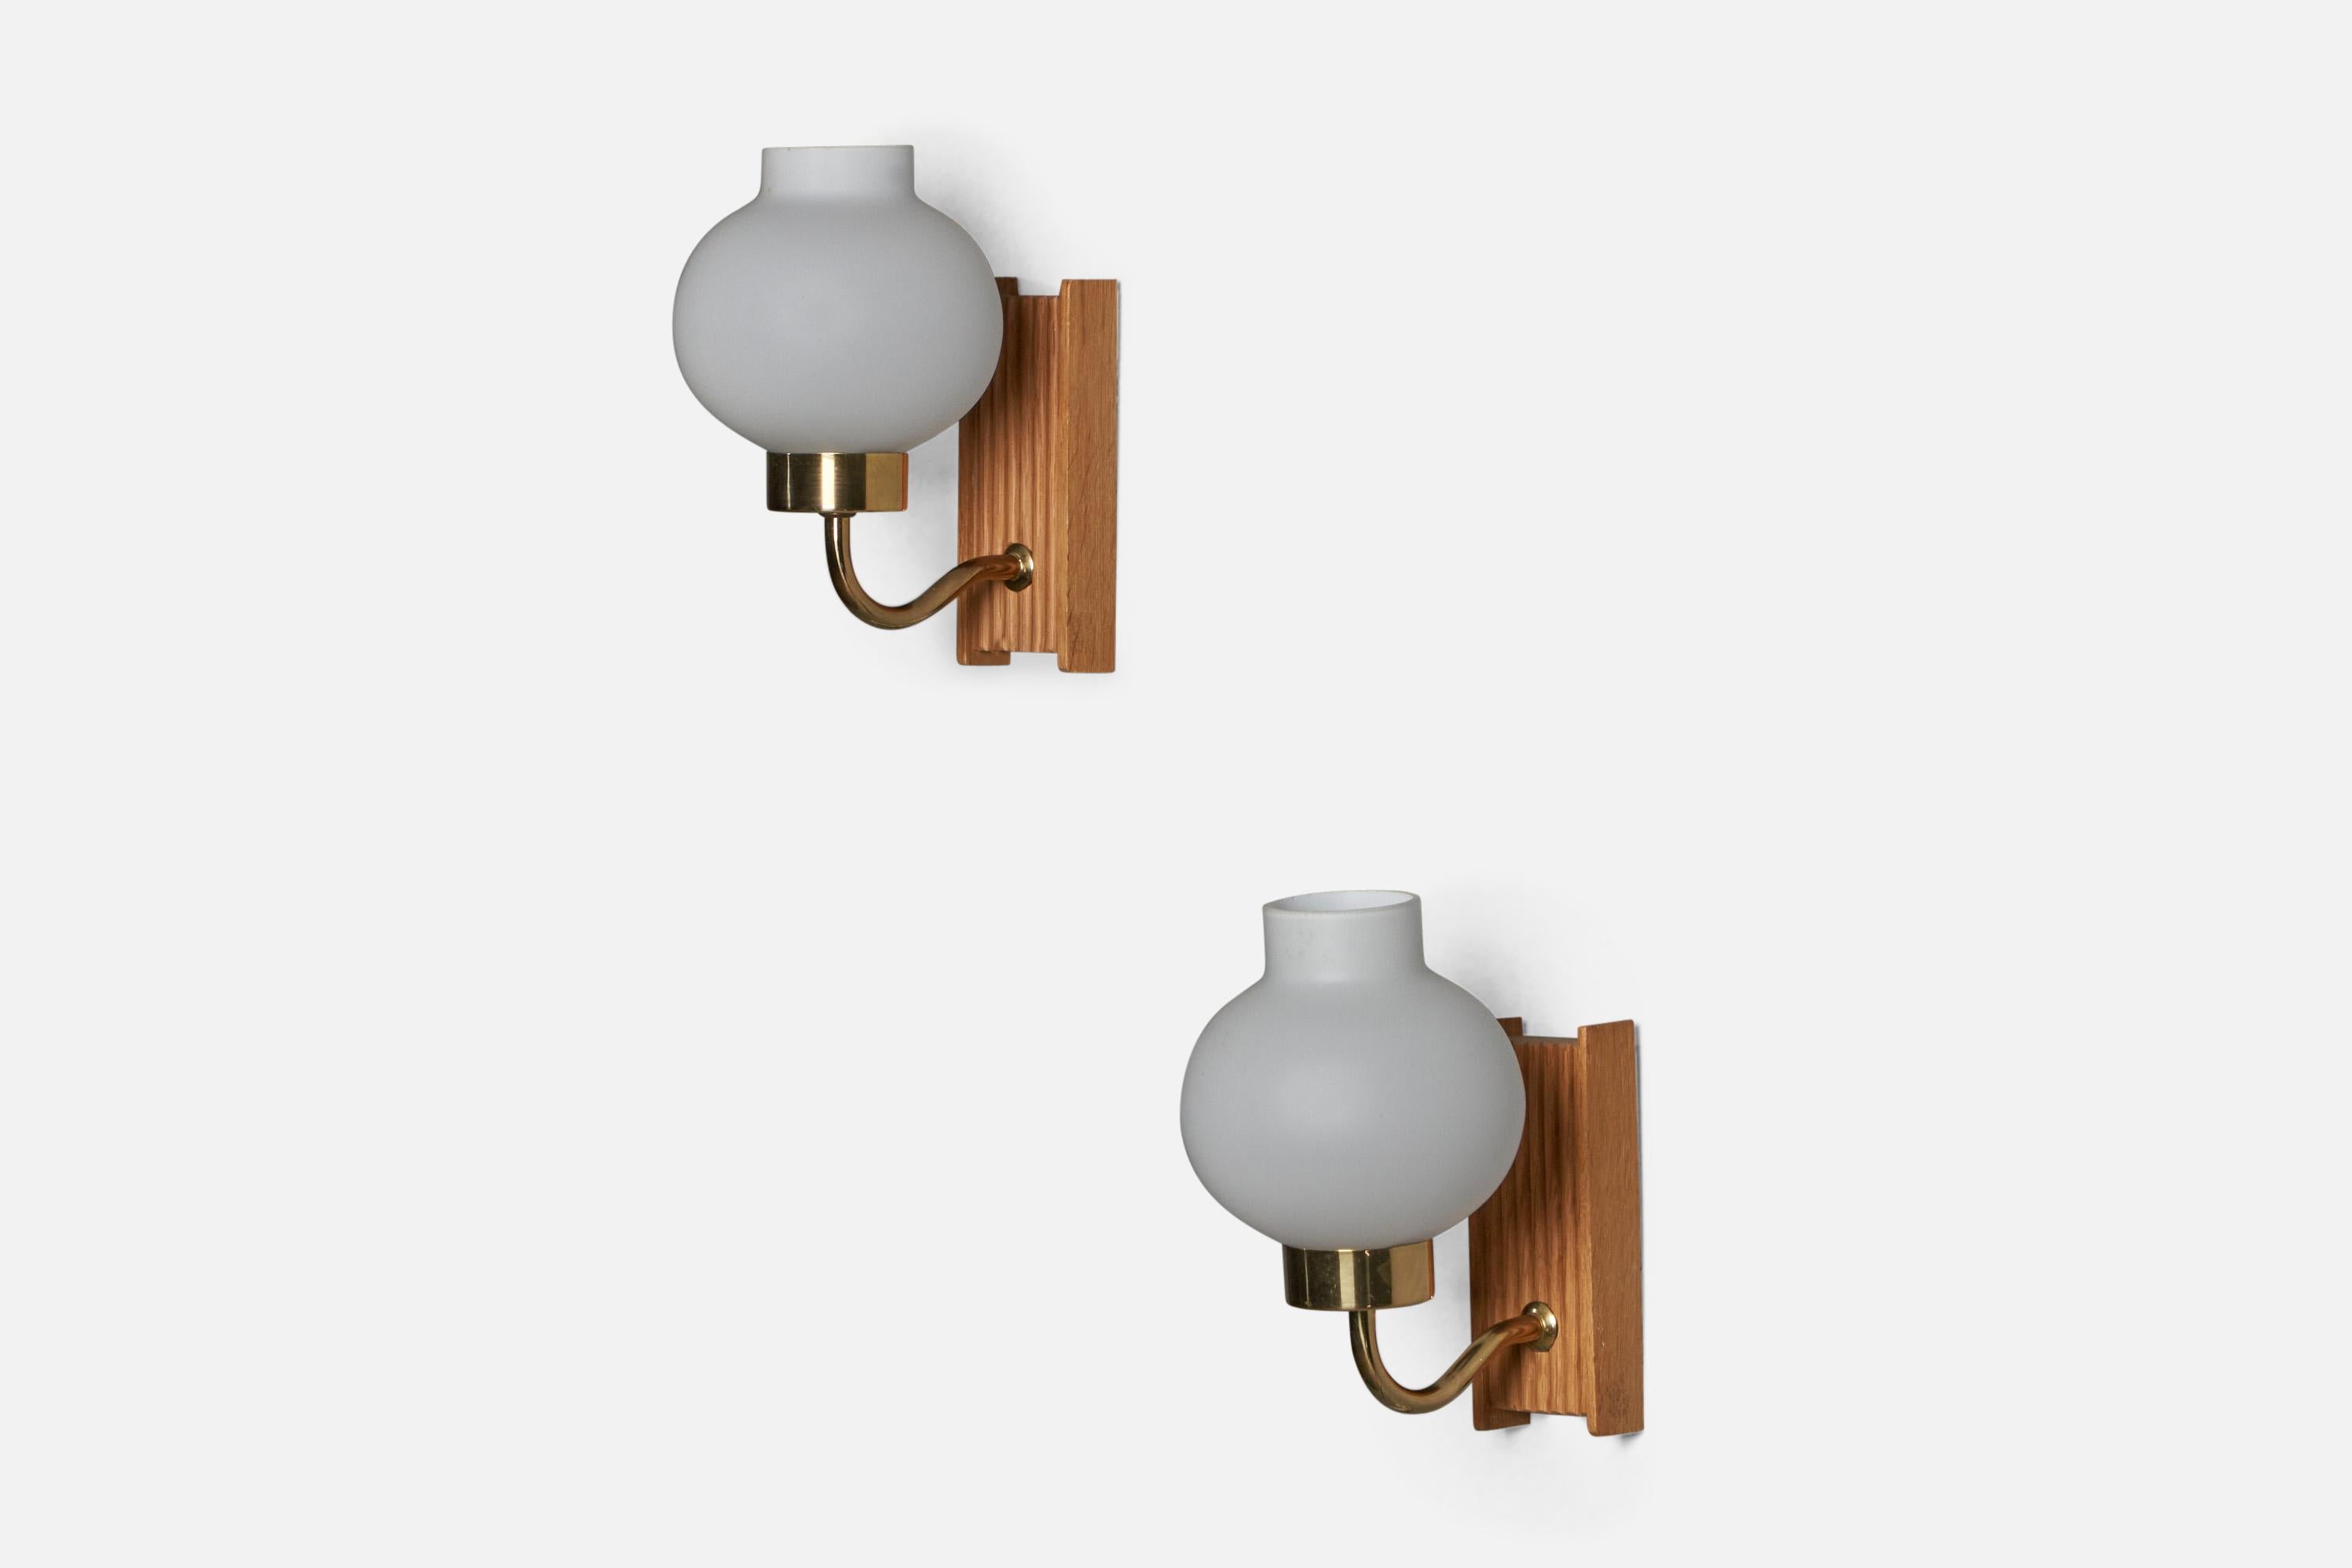 A pair of oak, brass and opaline glass wall lights designed and produced in Sweden, c. 1950s.

Overall Dimensions (inches): 8.25” H x 4.75” W x 6.75” D
Back Plate Dimensions (inches): 5.75” H x 2.3” W x 1” D
Bulb Specifications: E-14 Bulb
Number of